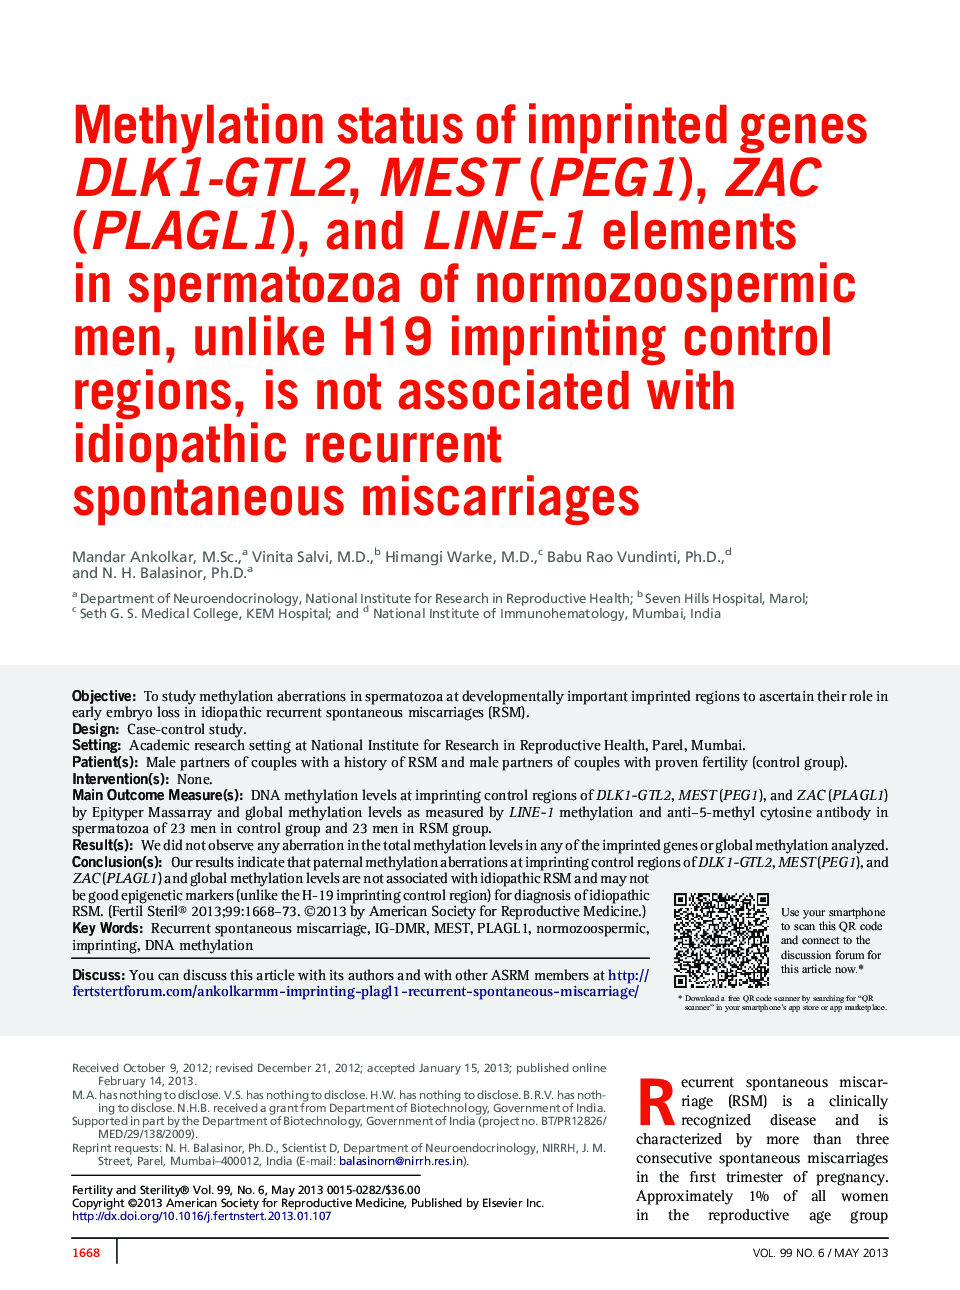 Methylation status of imprinted genes DLK1-GTL2, MEST (PEG1), ZAC (PLAGL1), andÂ LINE-1 elements inÂ spermatozoa of normozoospermic men, unlike H19 imprinting control regions, is not associated with idiopathic recurrent spontaneous miscarriages